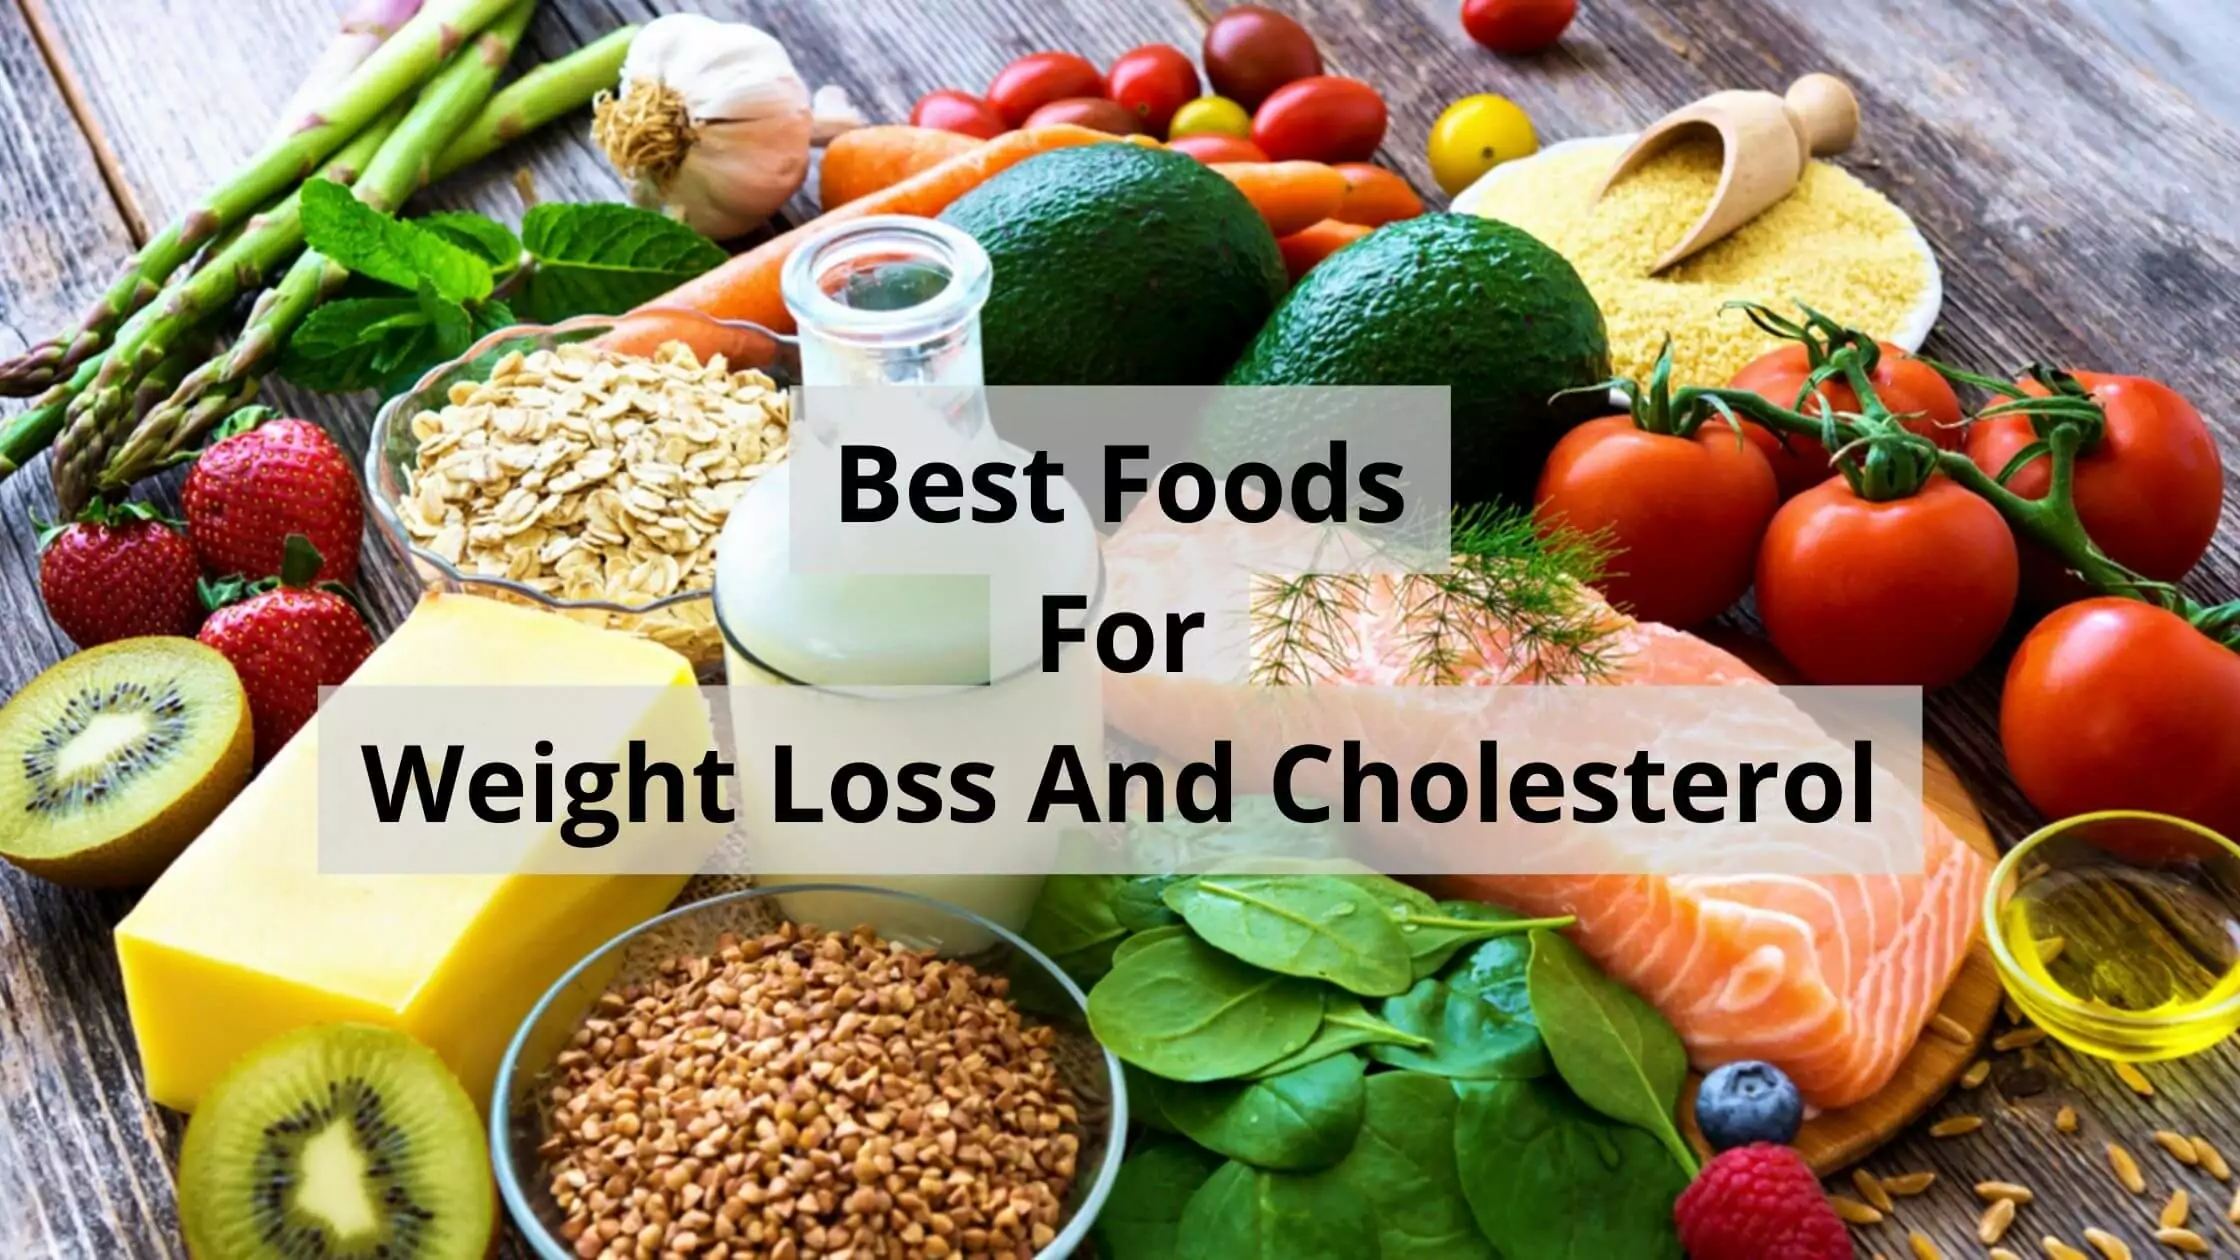 Best Foods For Weight Loss And Cholesterol